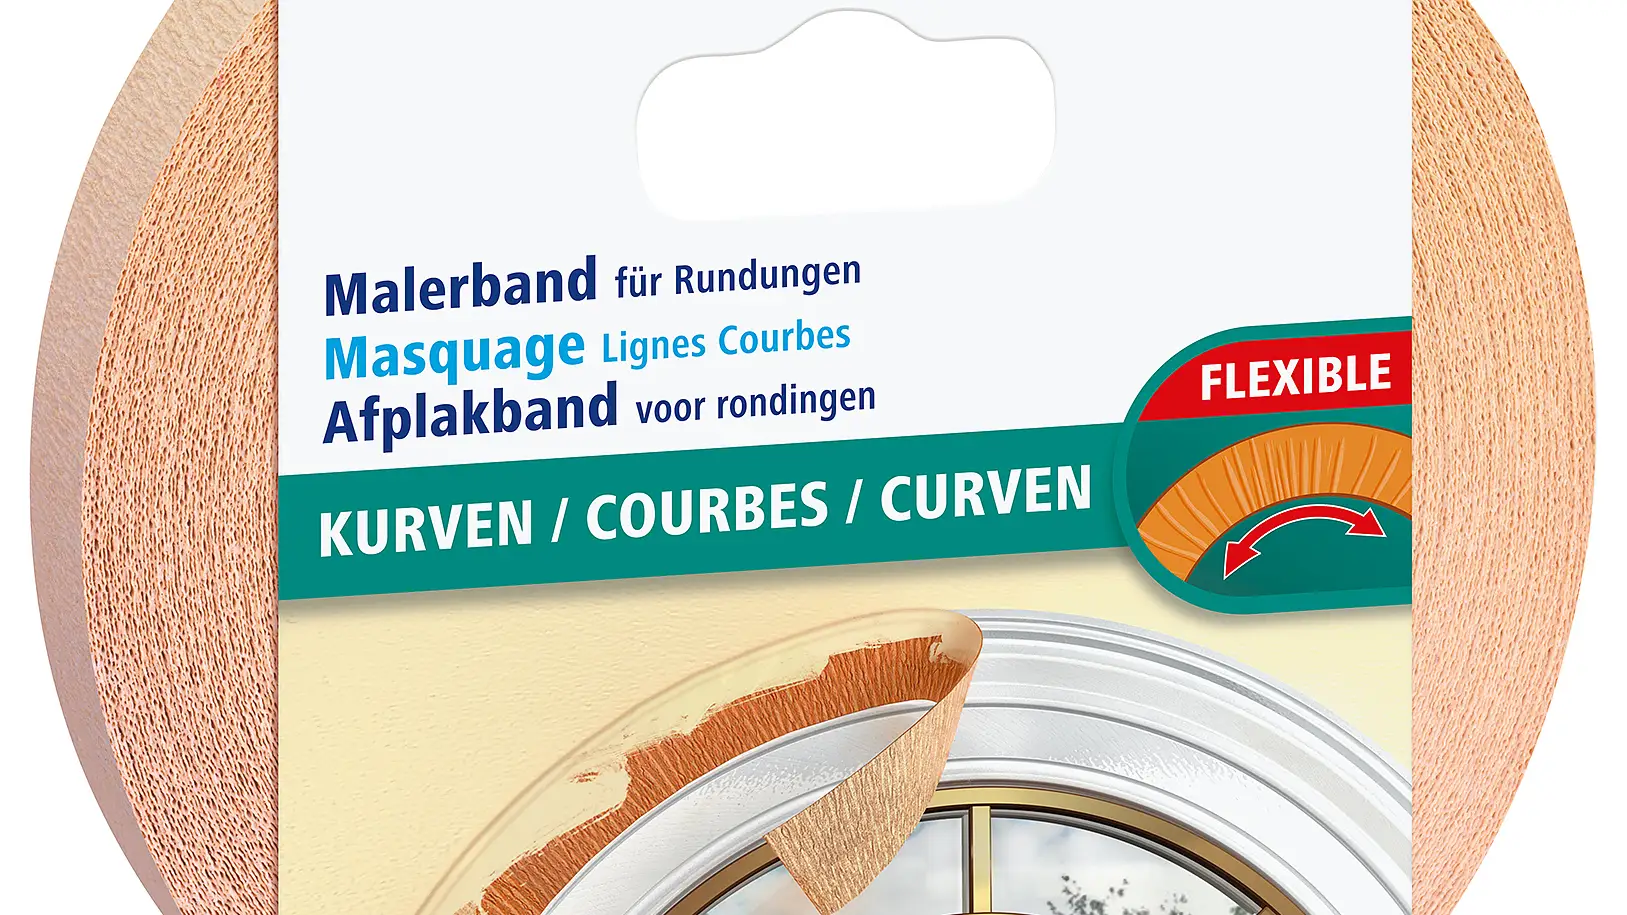 Particularly flexible, very stretchy, therefore, ideal for masking curves and round shapes. For the gift pencil, the masking tape serves a different purpose and gives the pen tips a wooden look. CURVES can be used on rough and smooth surfaces, 25 m x 30 mm, 4.49 Euro.